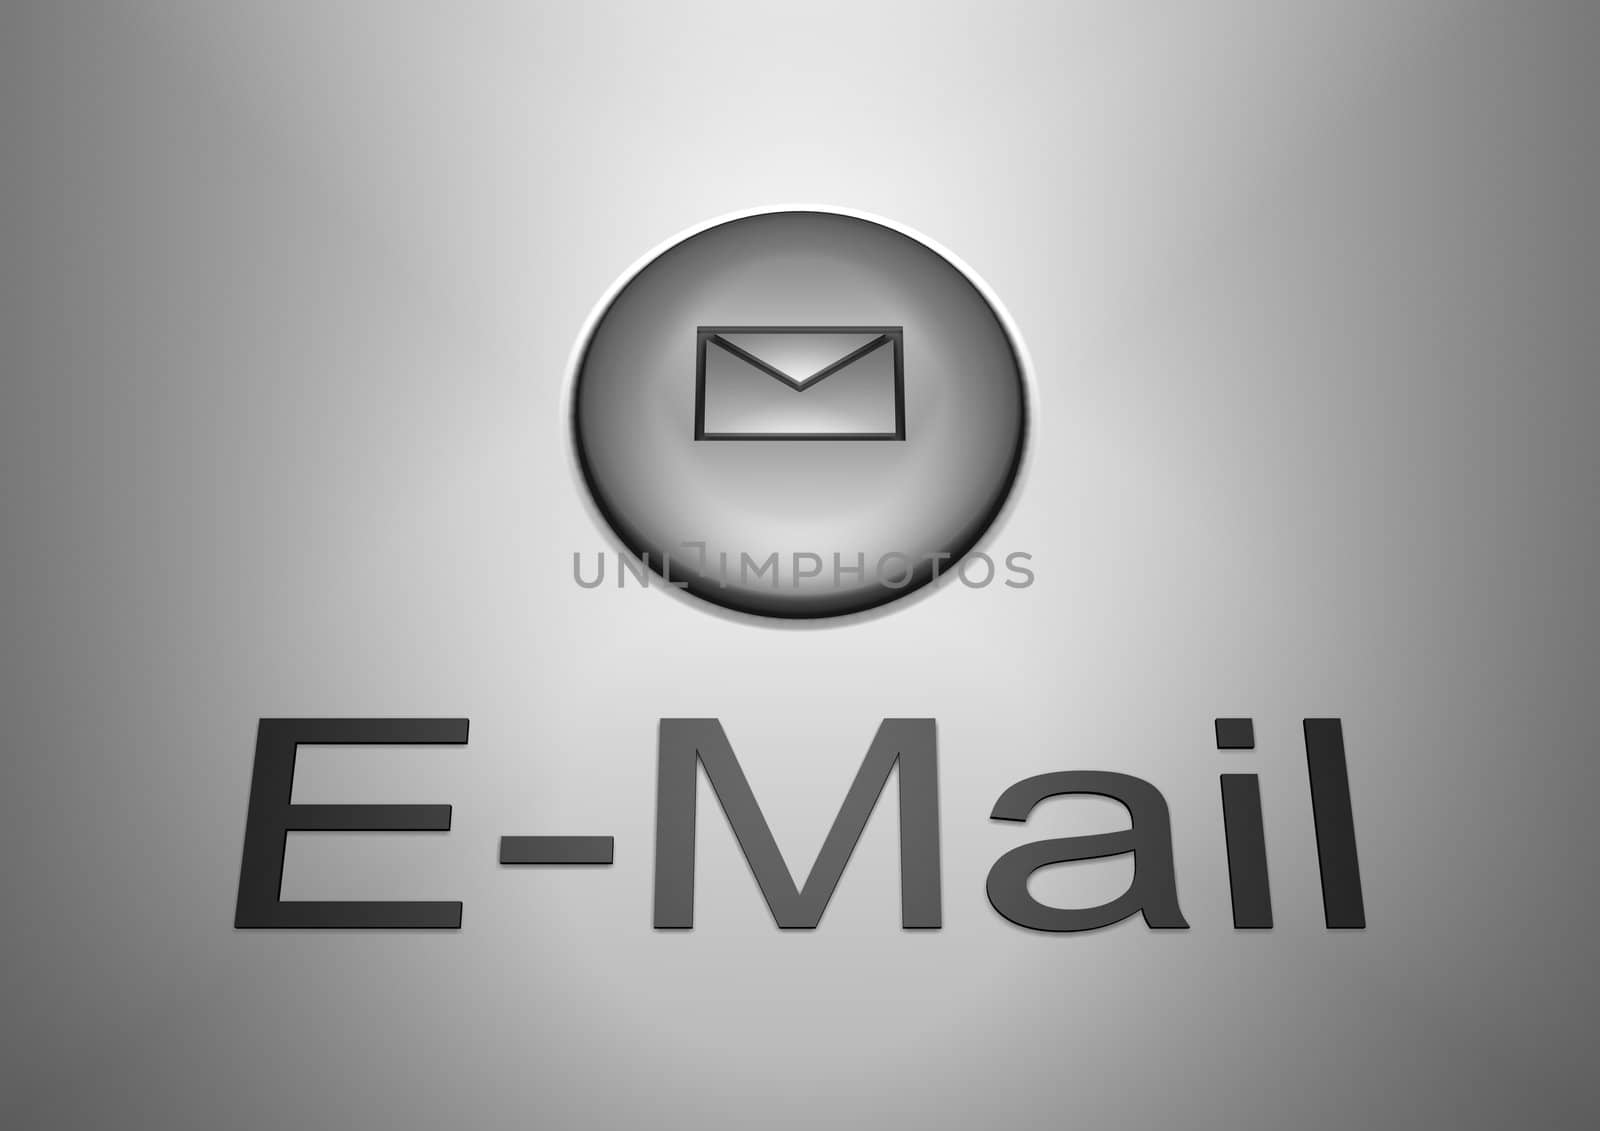 Illustration of a button with a letter cut into it and the text E-mail